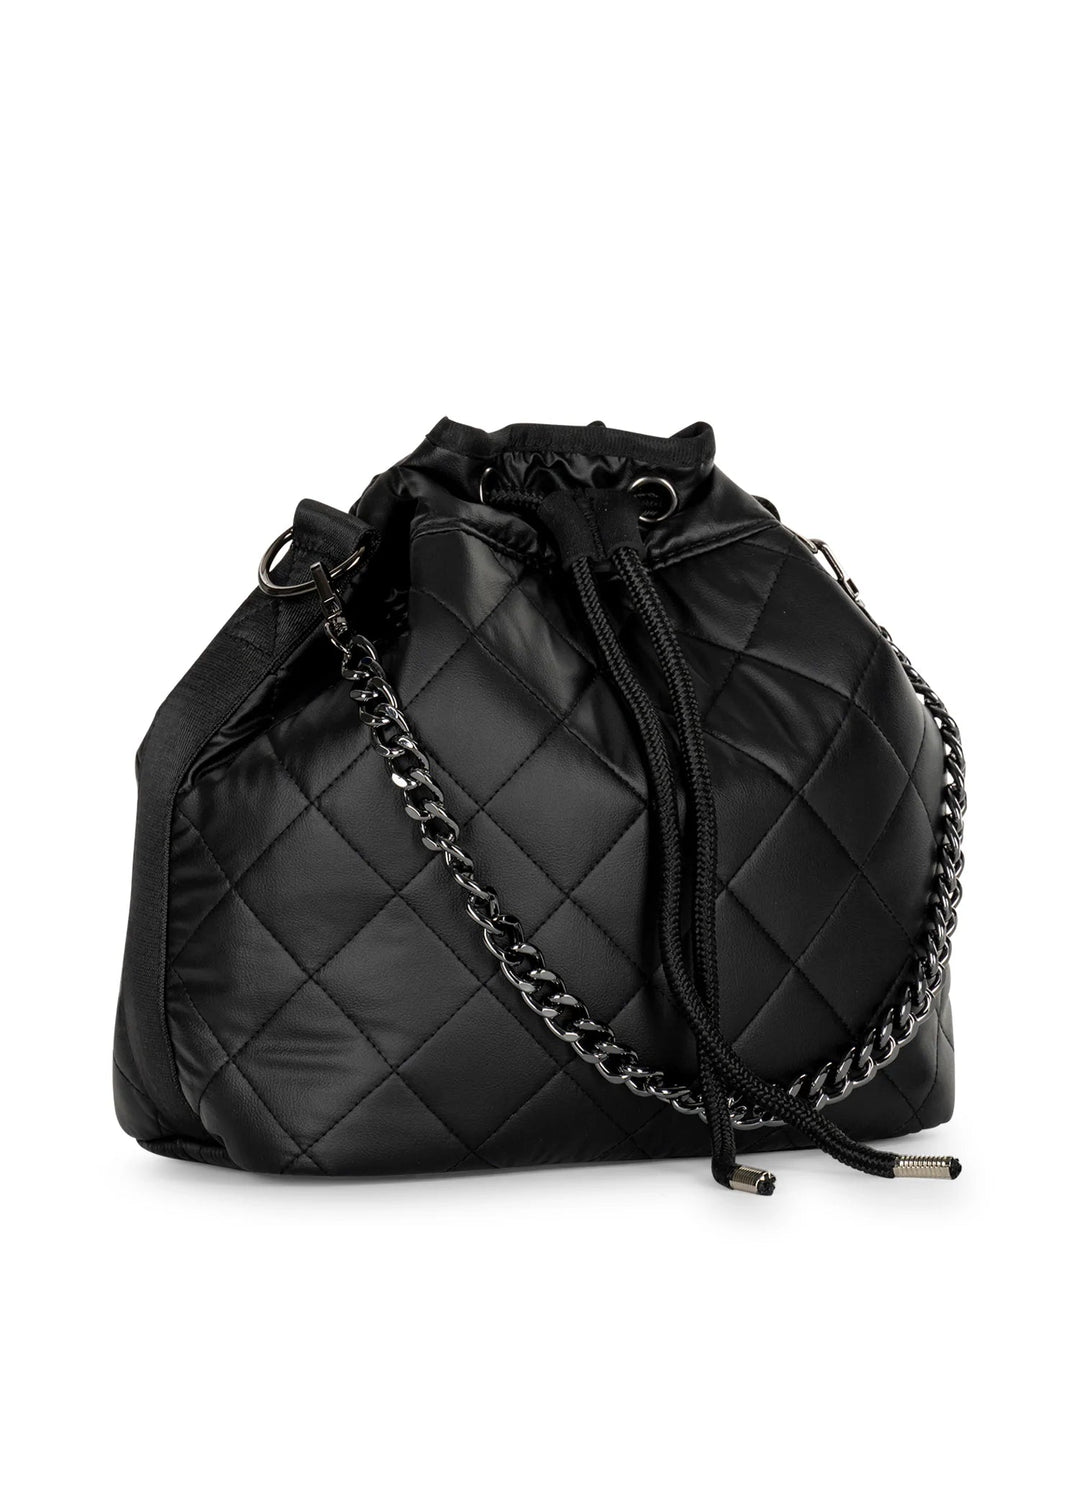 Vintage Chanel Large Sized Black Leather x Canvas Quilted Bucket Bag - Mrs  Vintage - Selling Vintage Wedding Lace Dress / Gowns & Accessories from  1920s – 1990s. And many One of